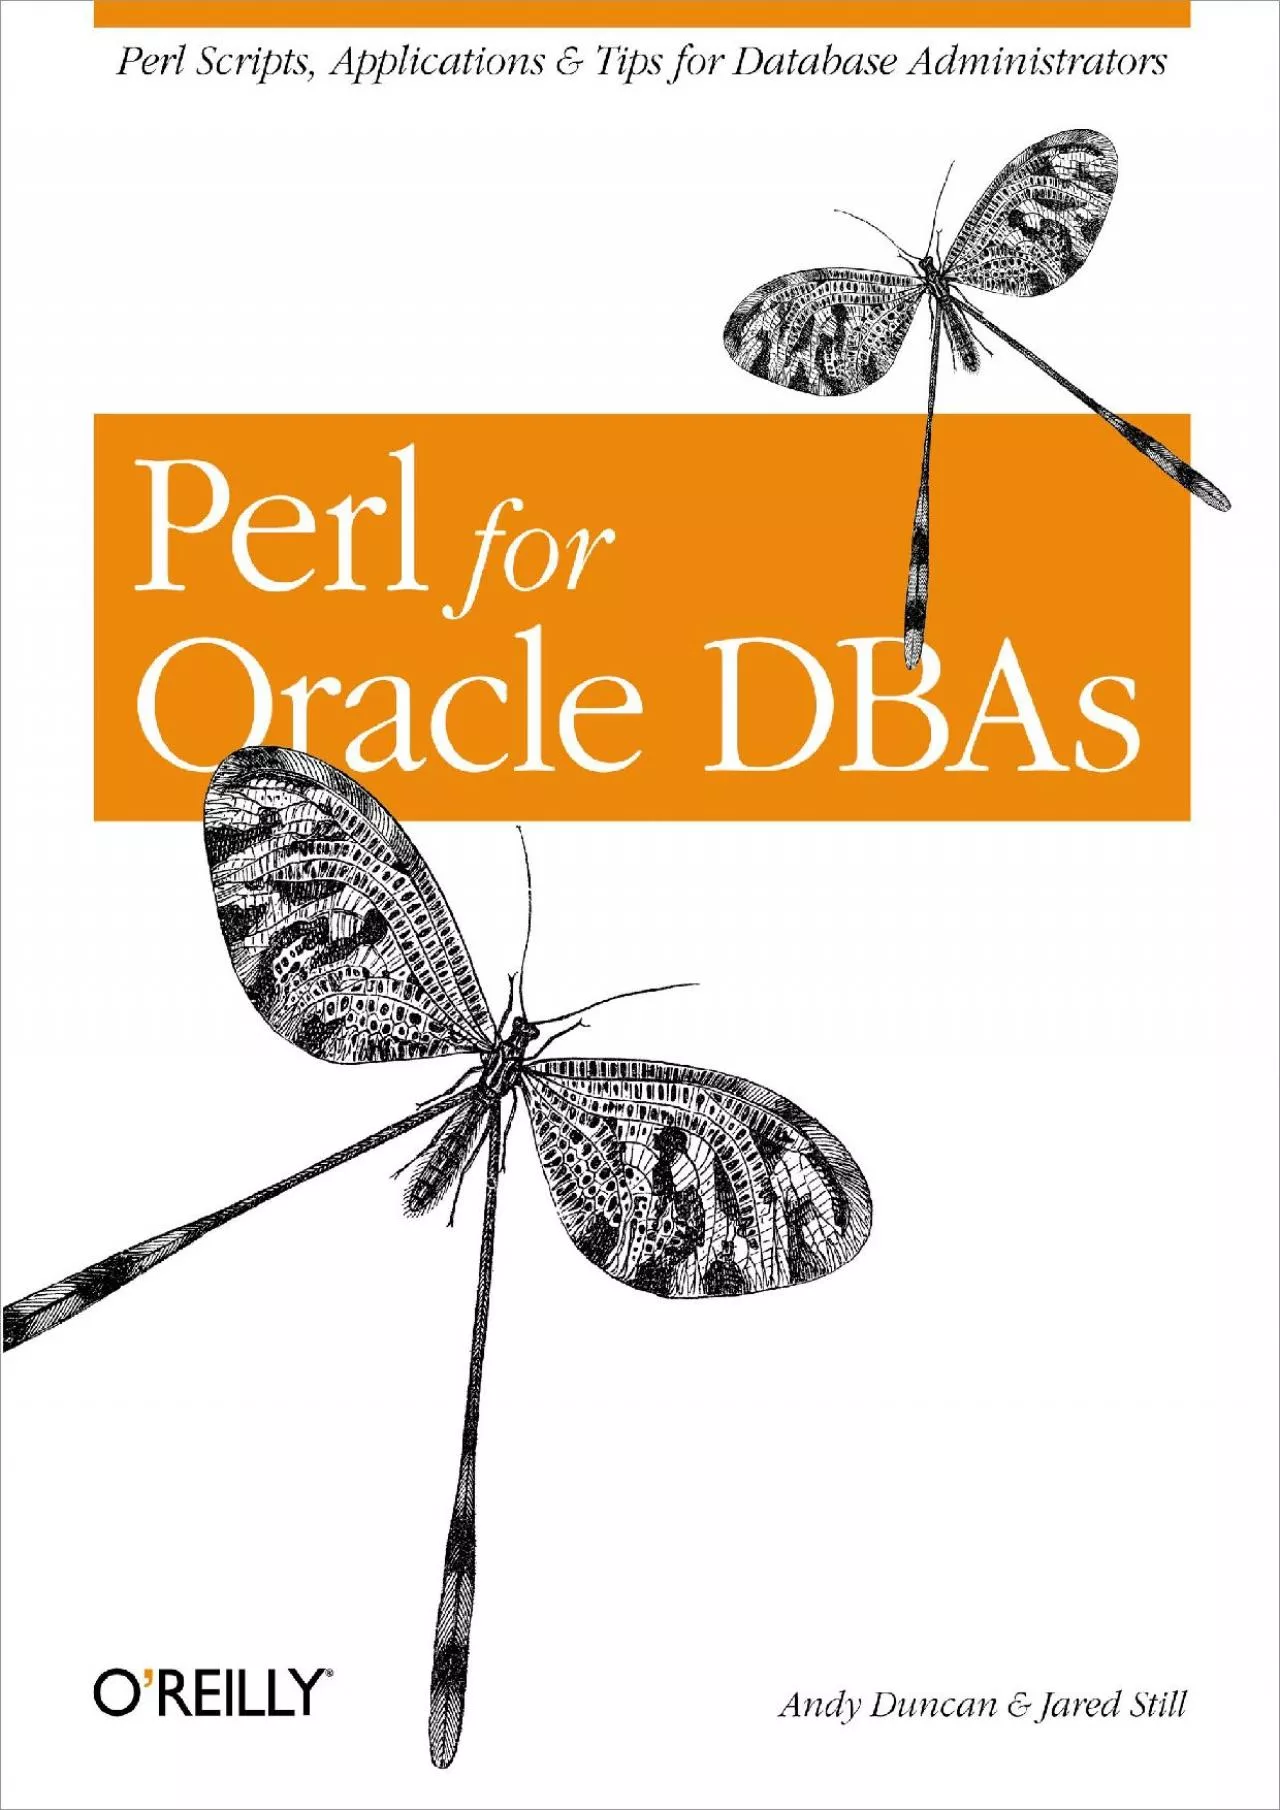 [PDF]-Perl for Oracle DBAs: Perl Scripts, Applications  Tips for Database Administrators